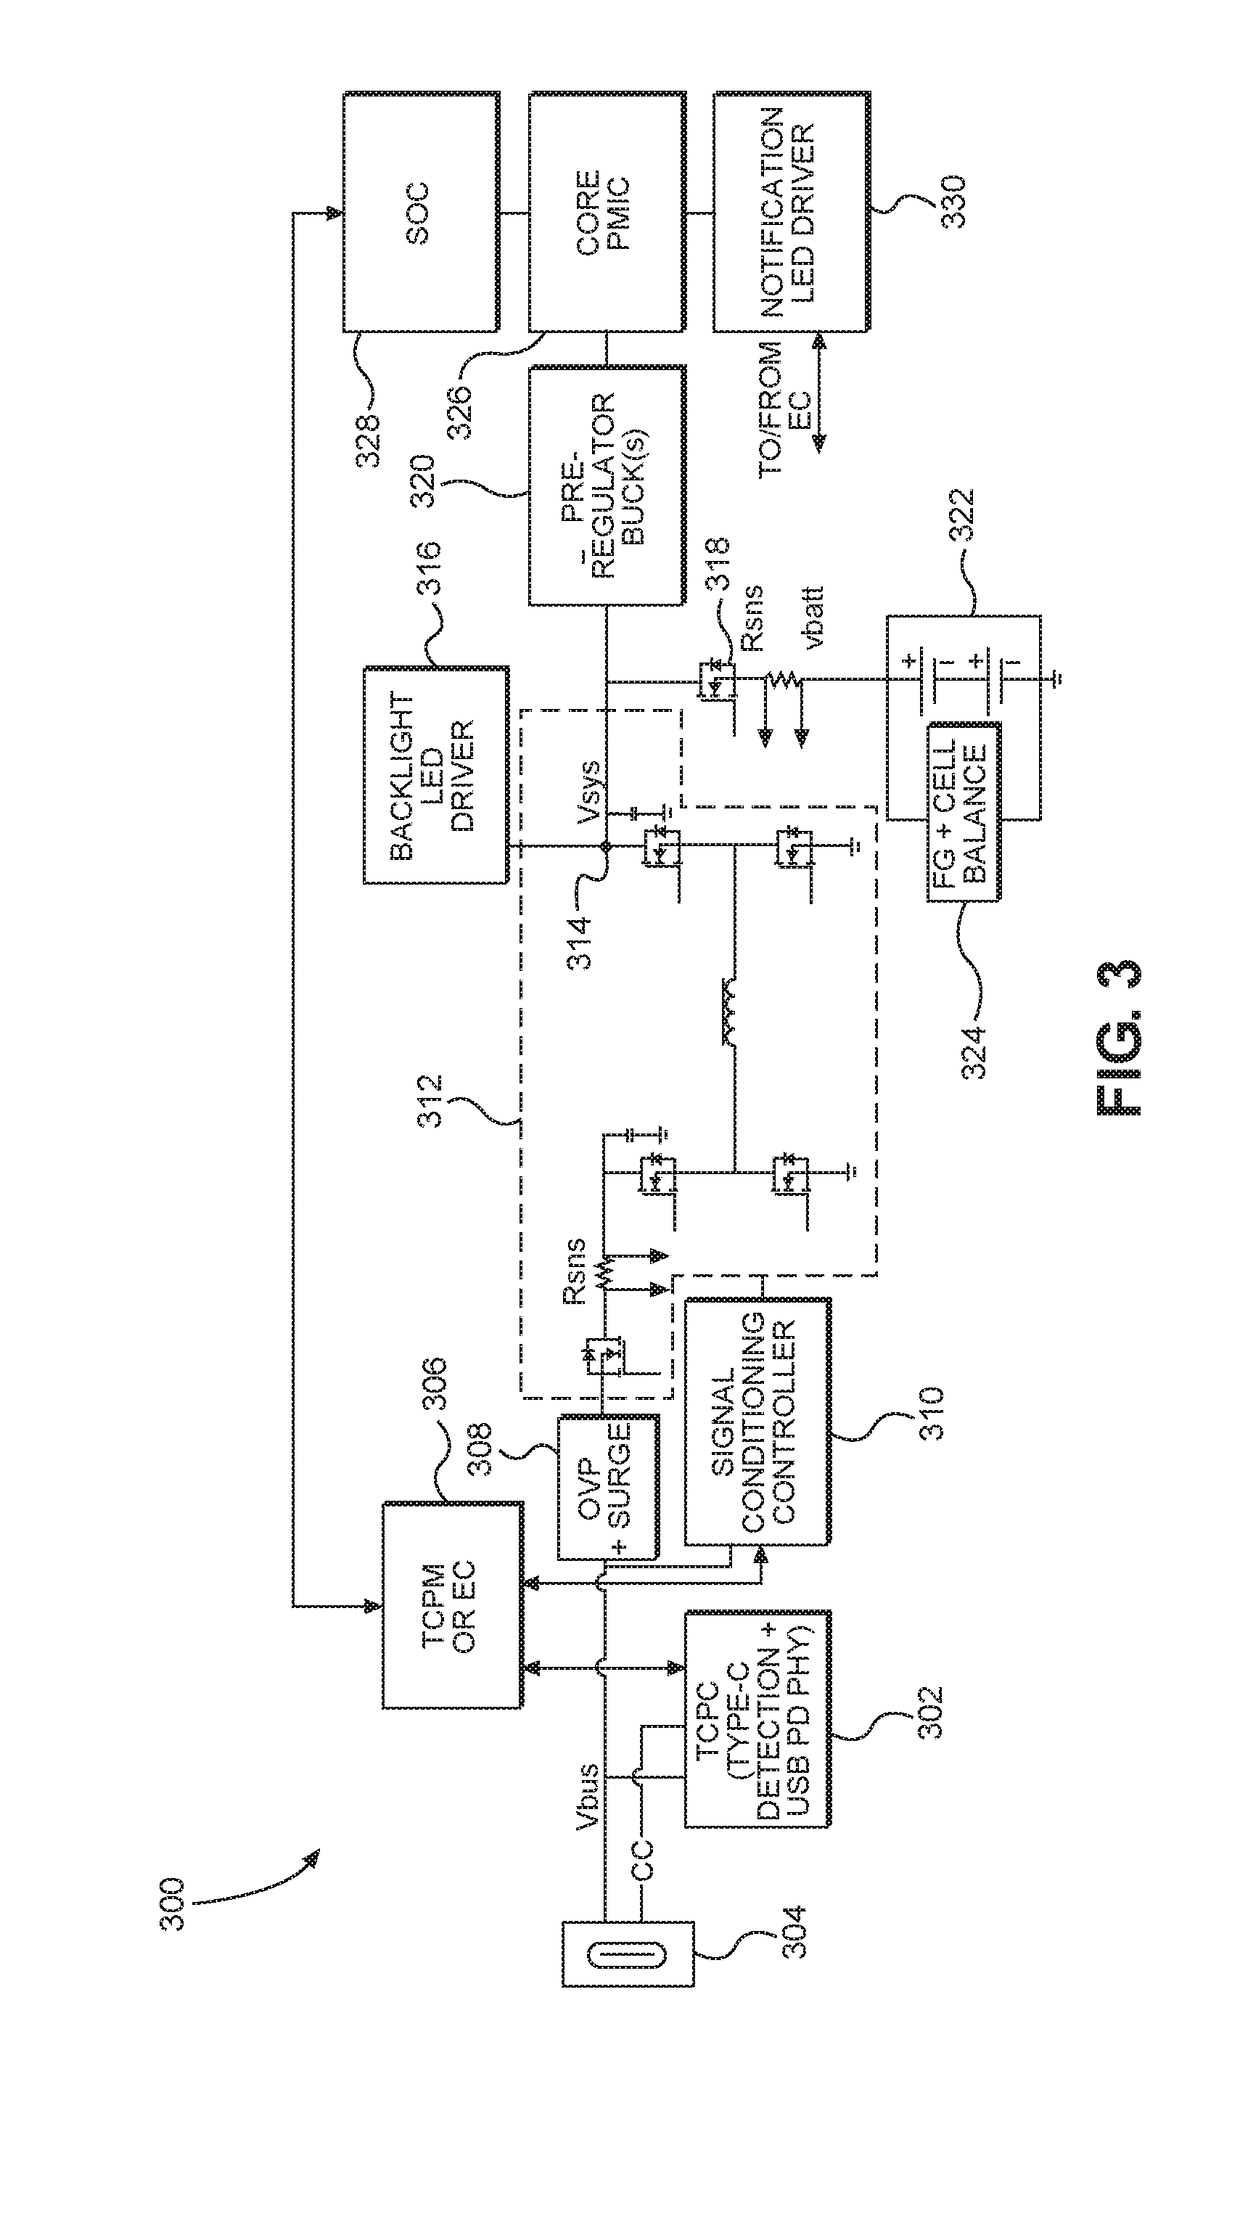 Systems and methods for port management